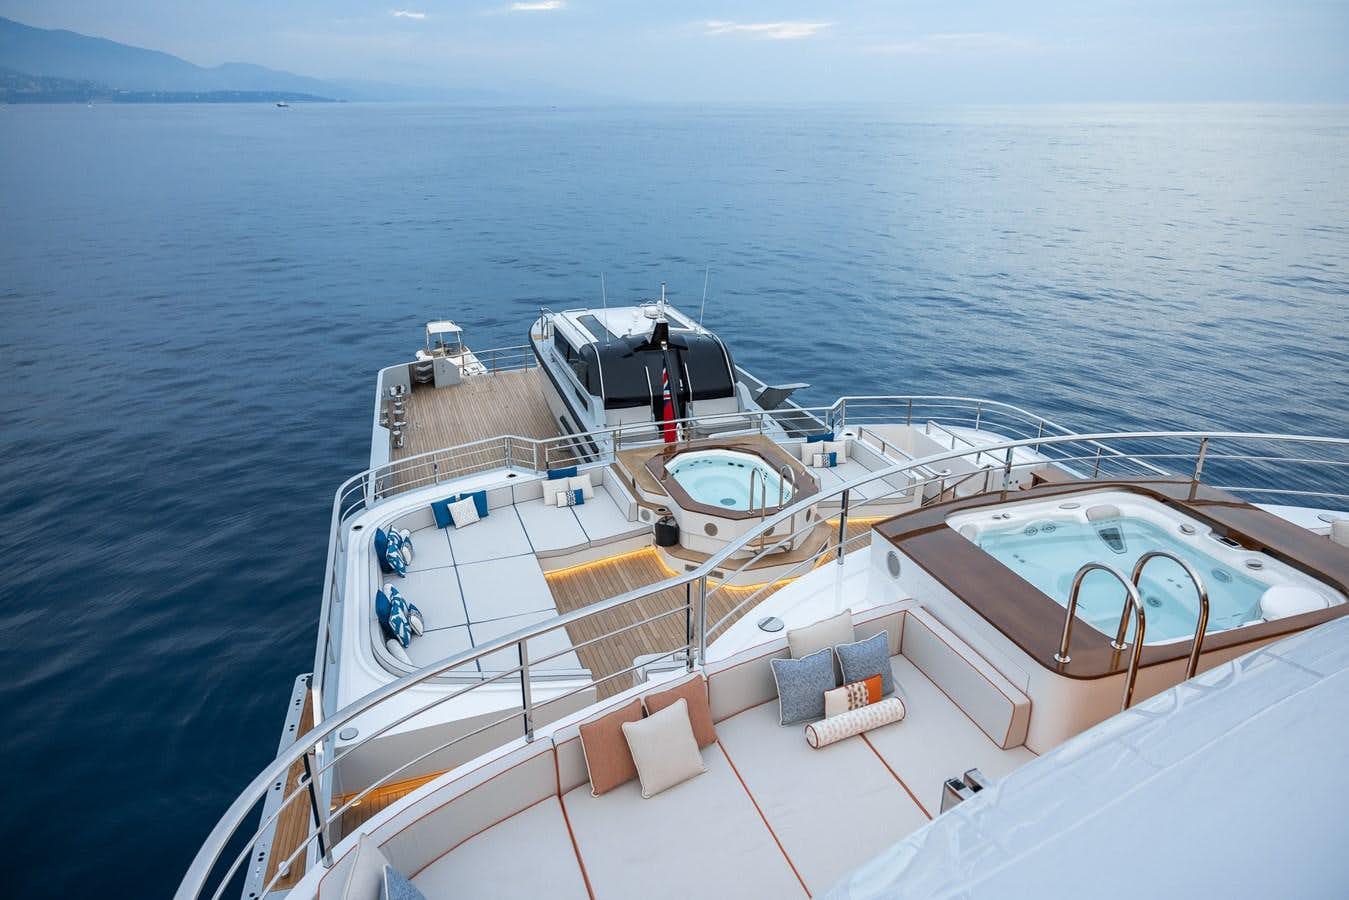 Victorious Yacht For Charter 278 11 85 01m 2021 6 Cabins Akyacht Nandj